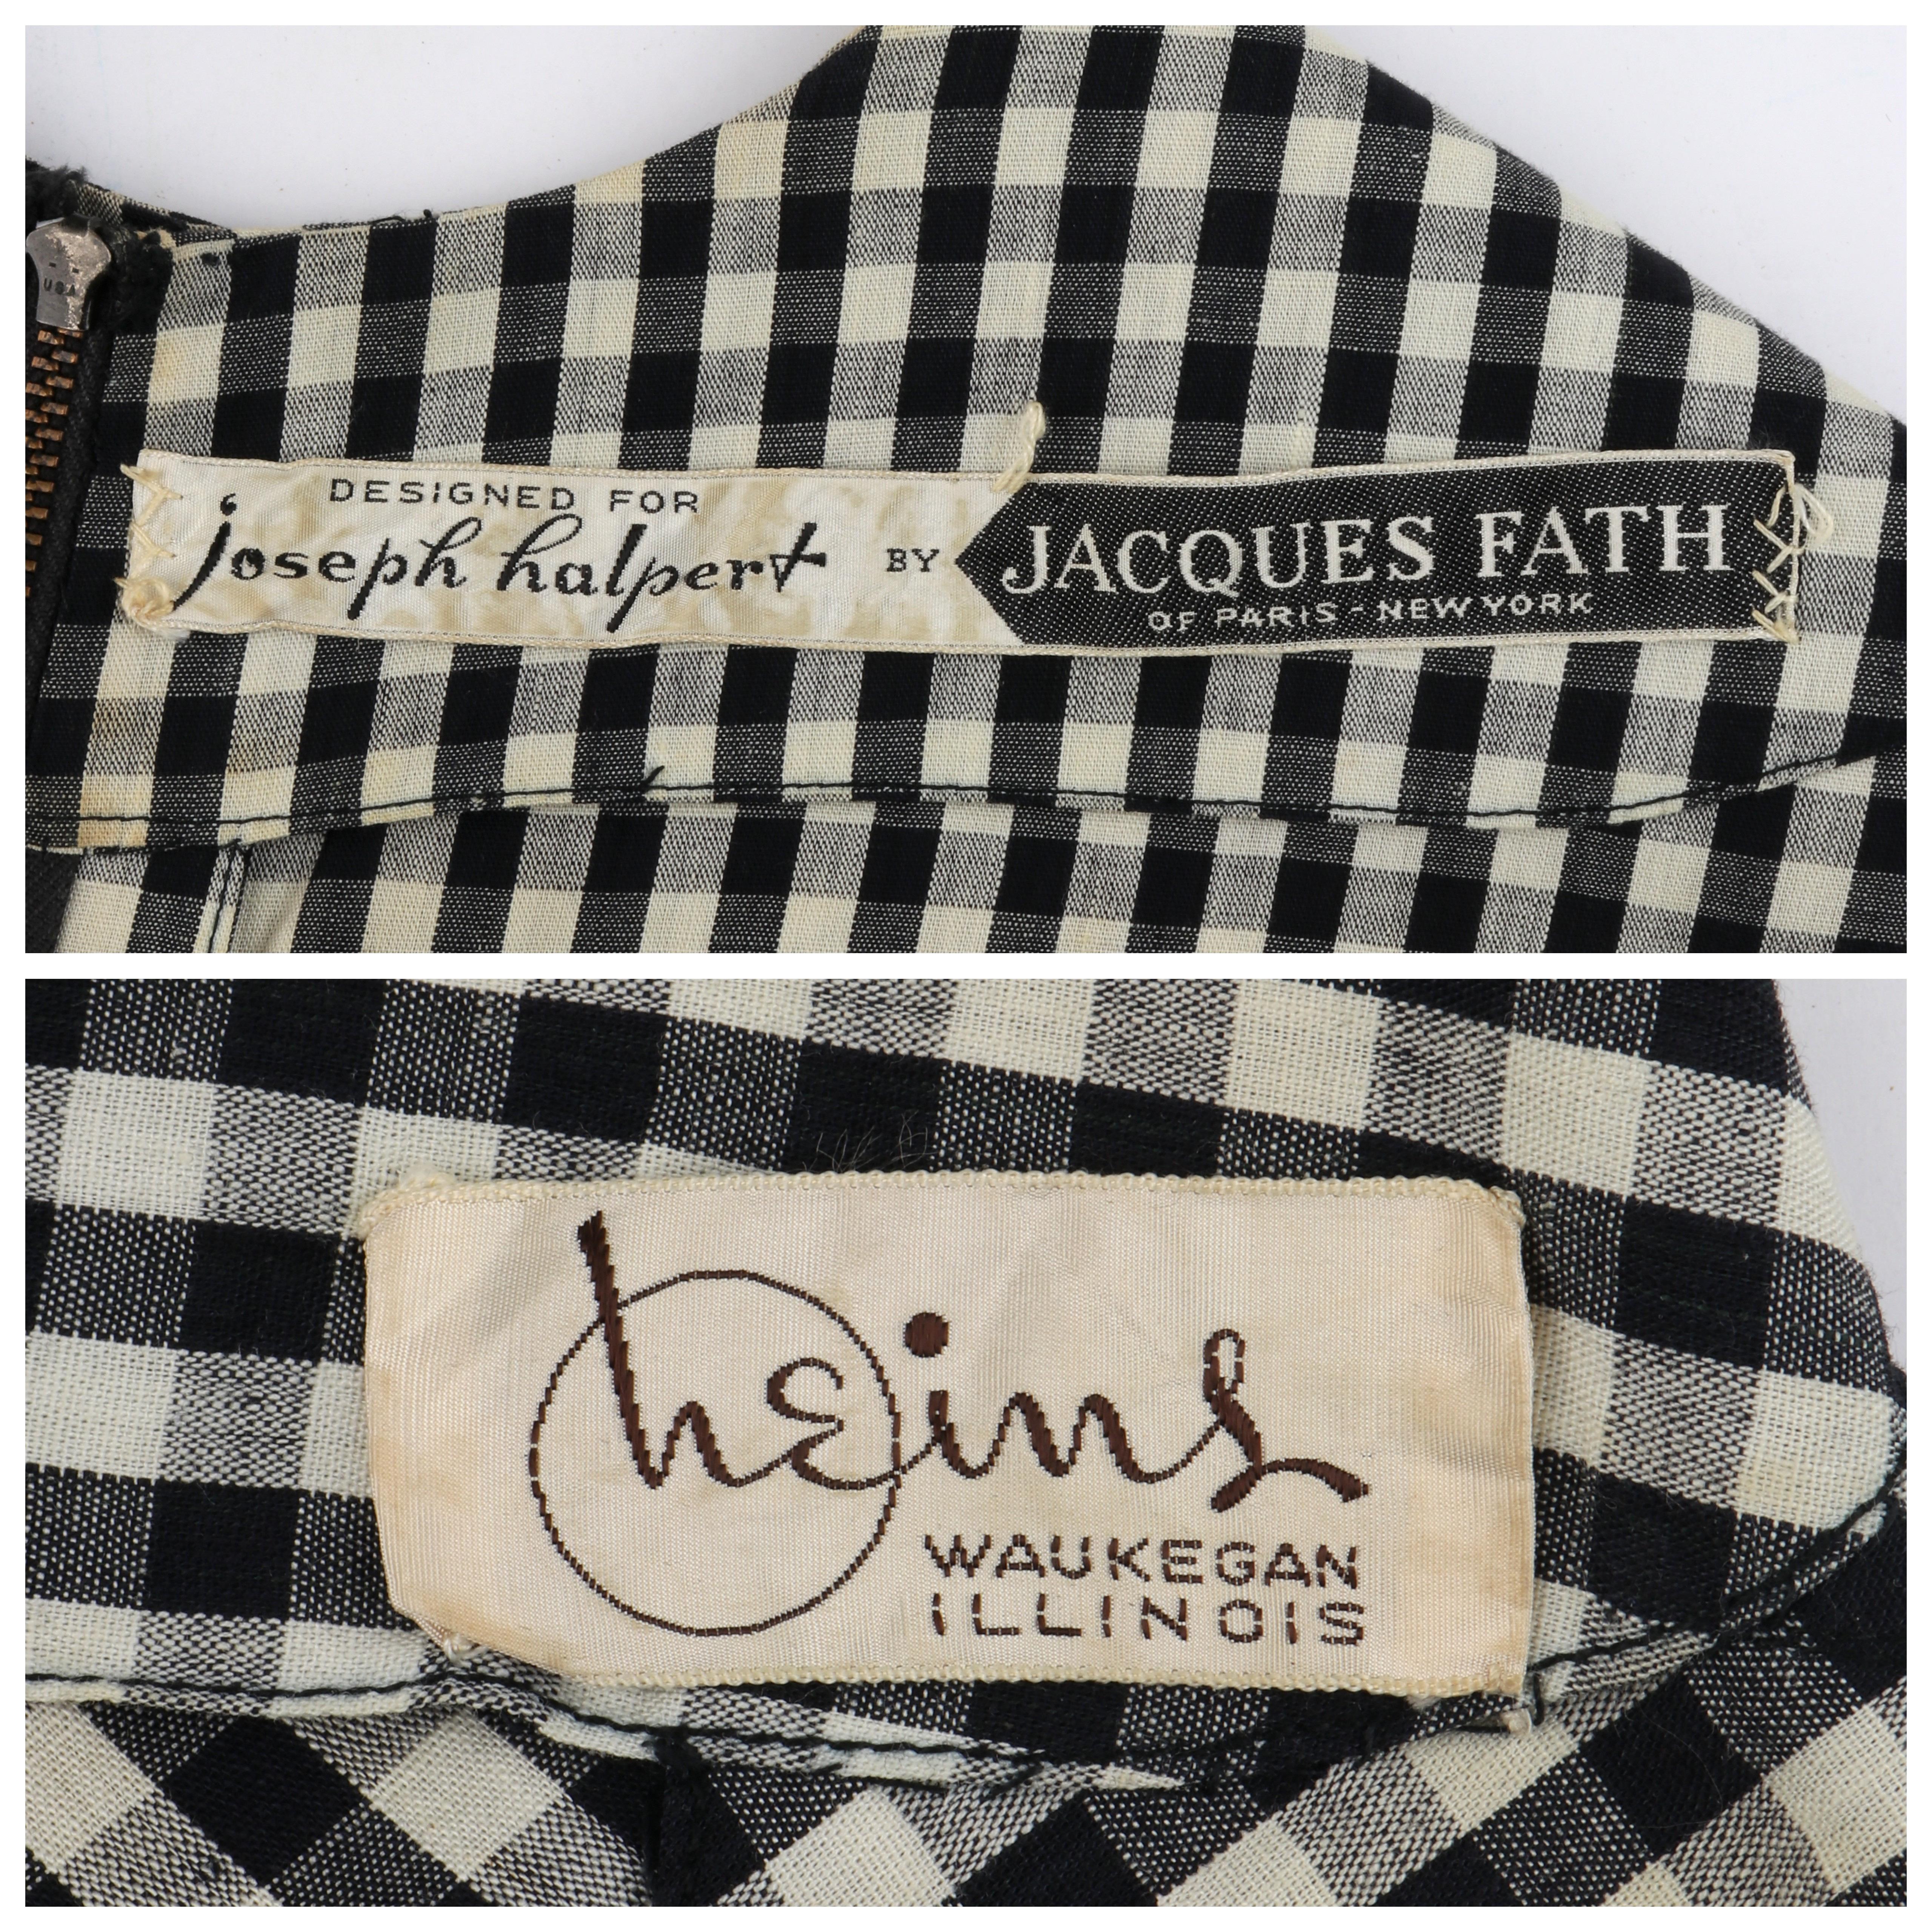 1949 S/S JACQUES FATH Black & White Gingham Fan Back Peplum Afternoon Dress For Sale 2